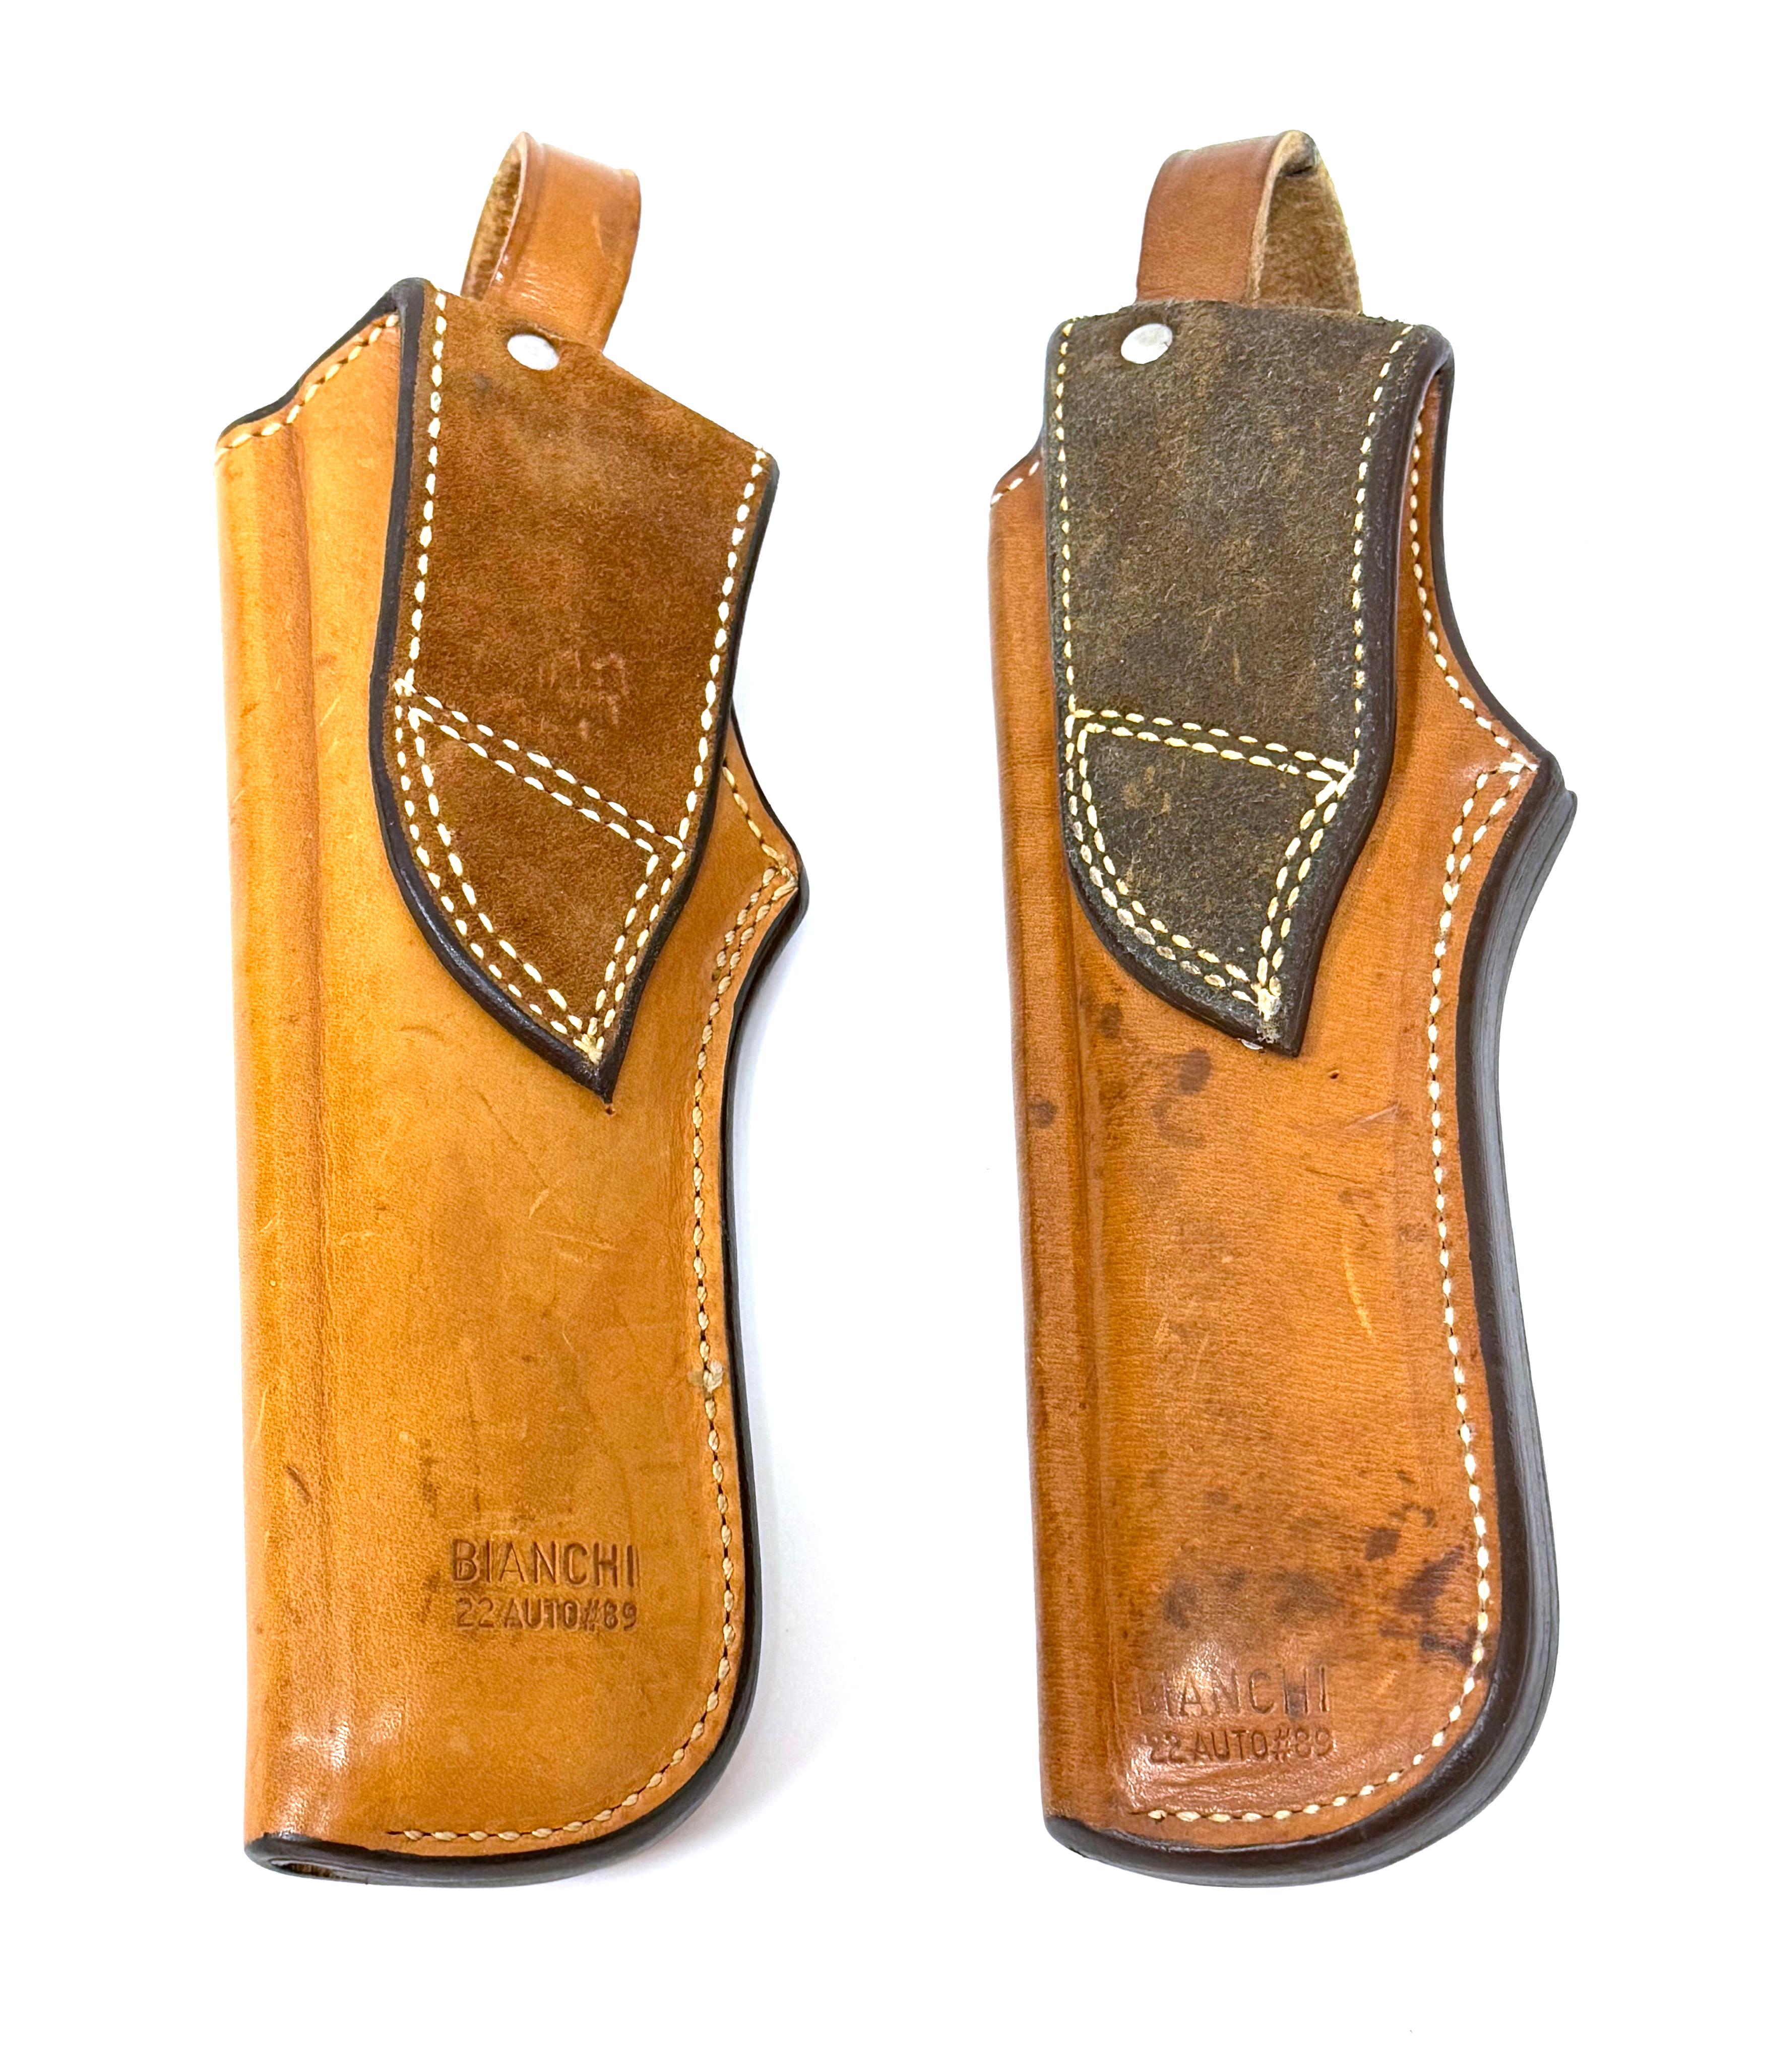 (2) Bianchi .22 AUTO #89 Leather Holsters 